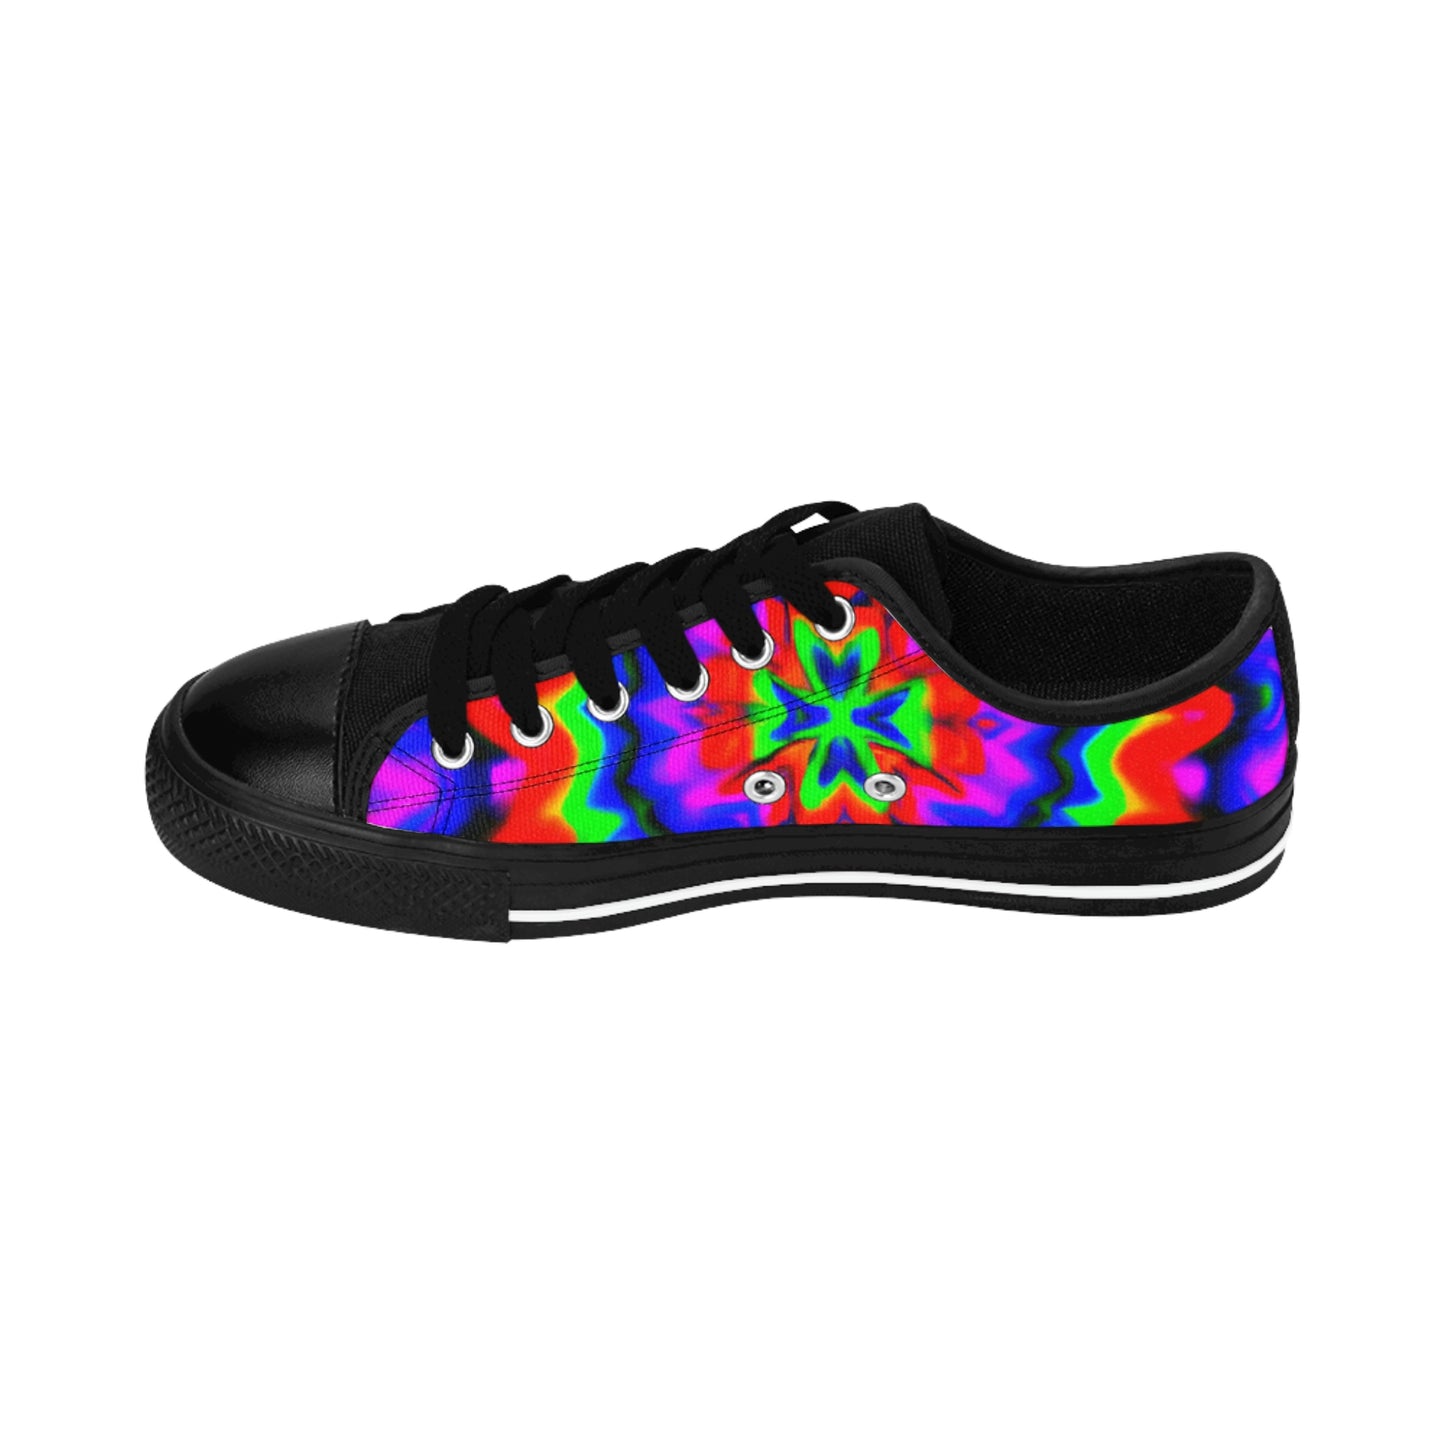 Godric the Shoe Maker - Psychedelic Low Top